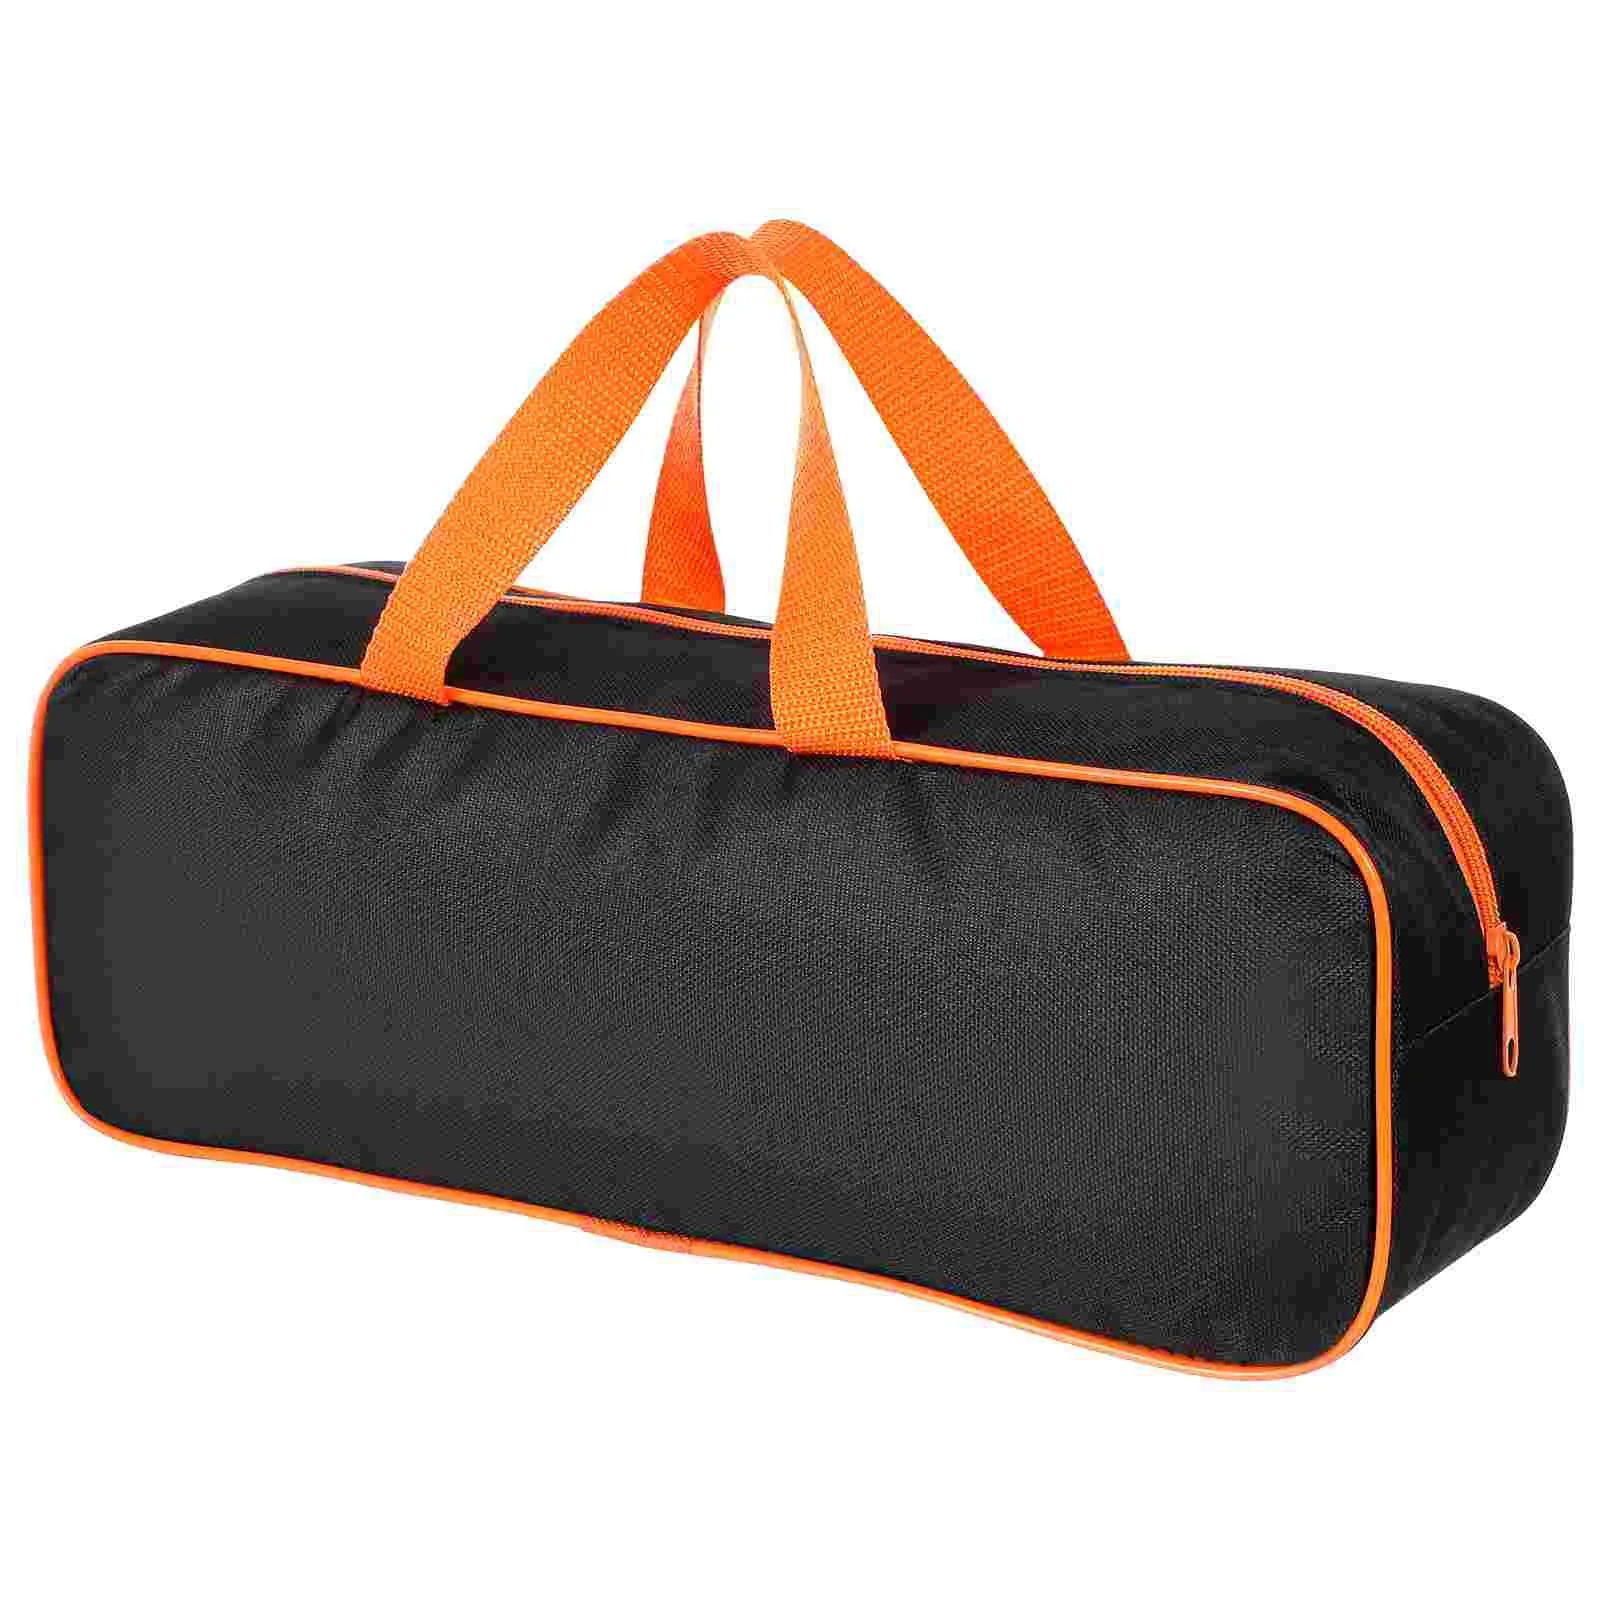 

Tool Storage Bag Camping Accessories Barbecue Bags Tools Carry Handbag Outdoor Oxford Cloth Grill Dad Picnic